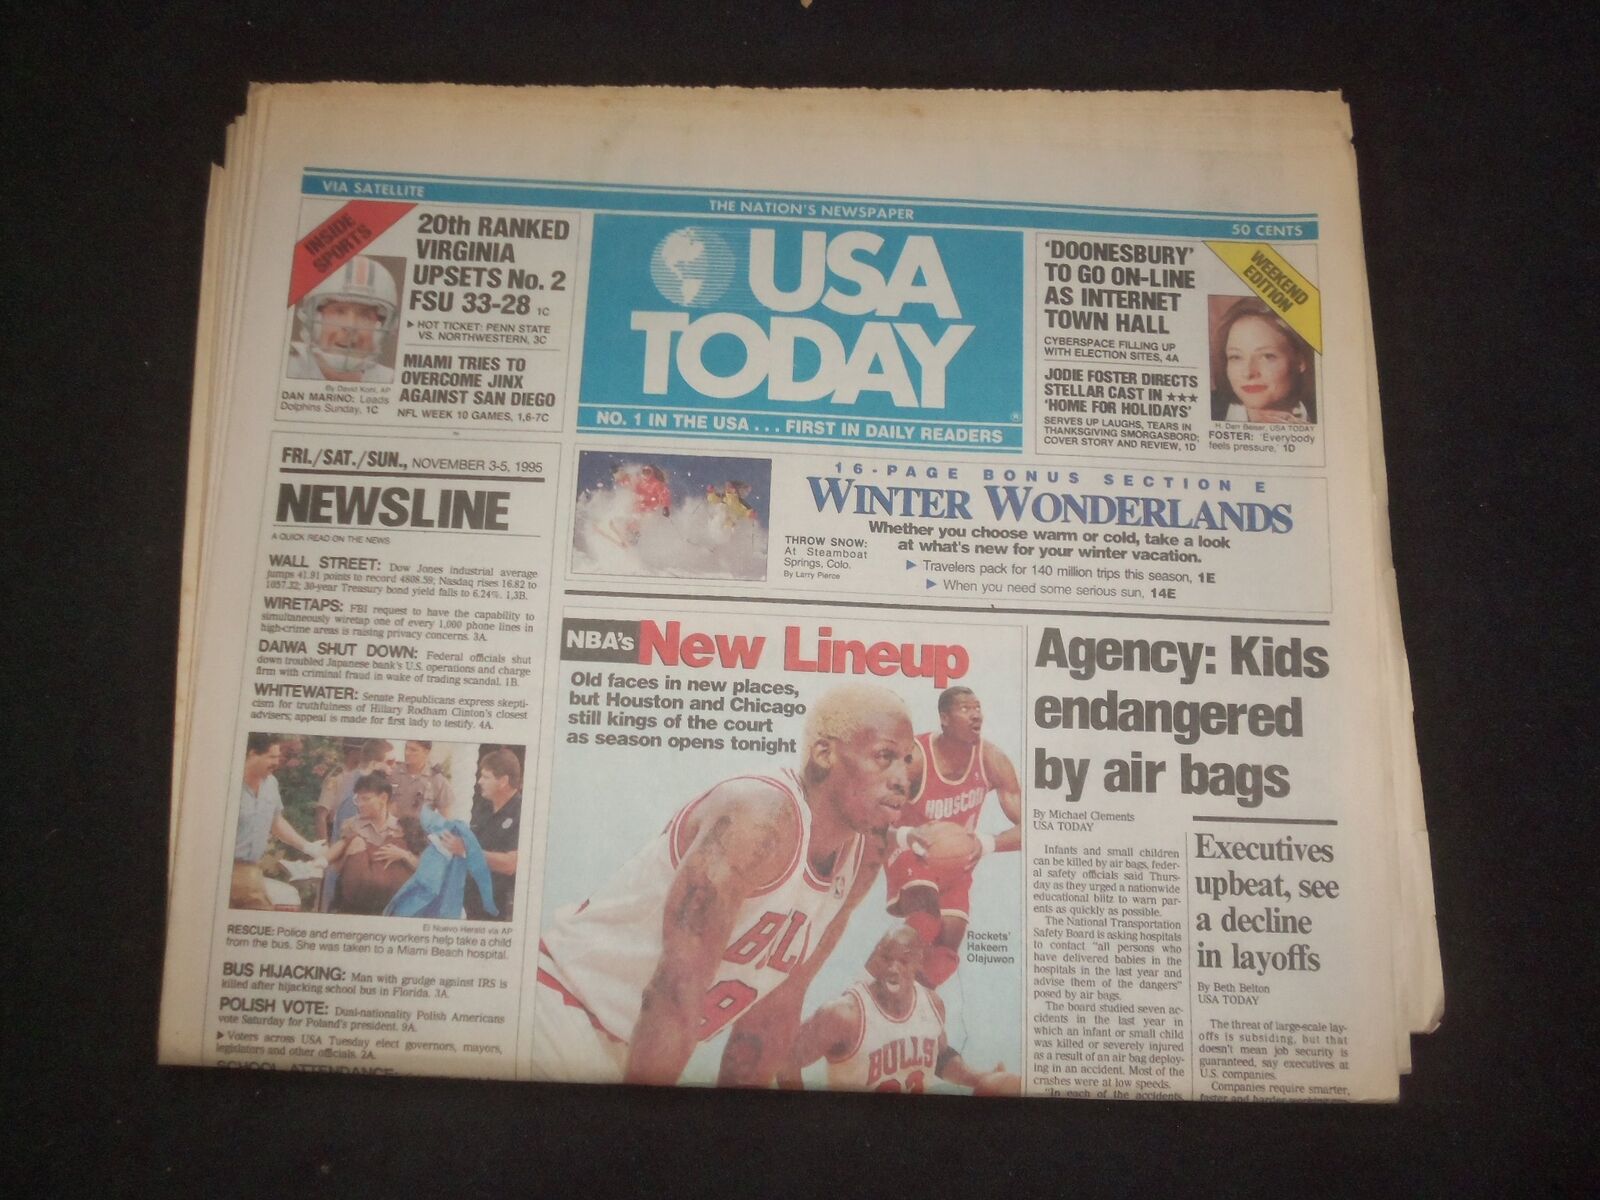 1995 NOVEMBER 3-5 USA TODAY NEWSPAPER - KIDS ENDANGERED BY AIR BAGS - NP 7806